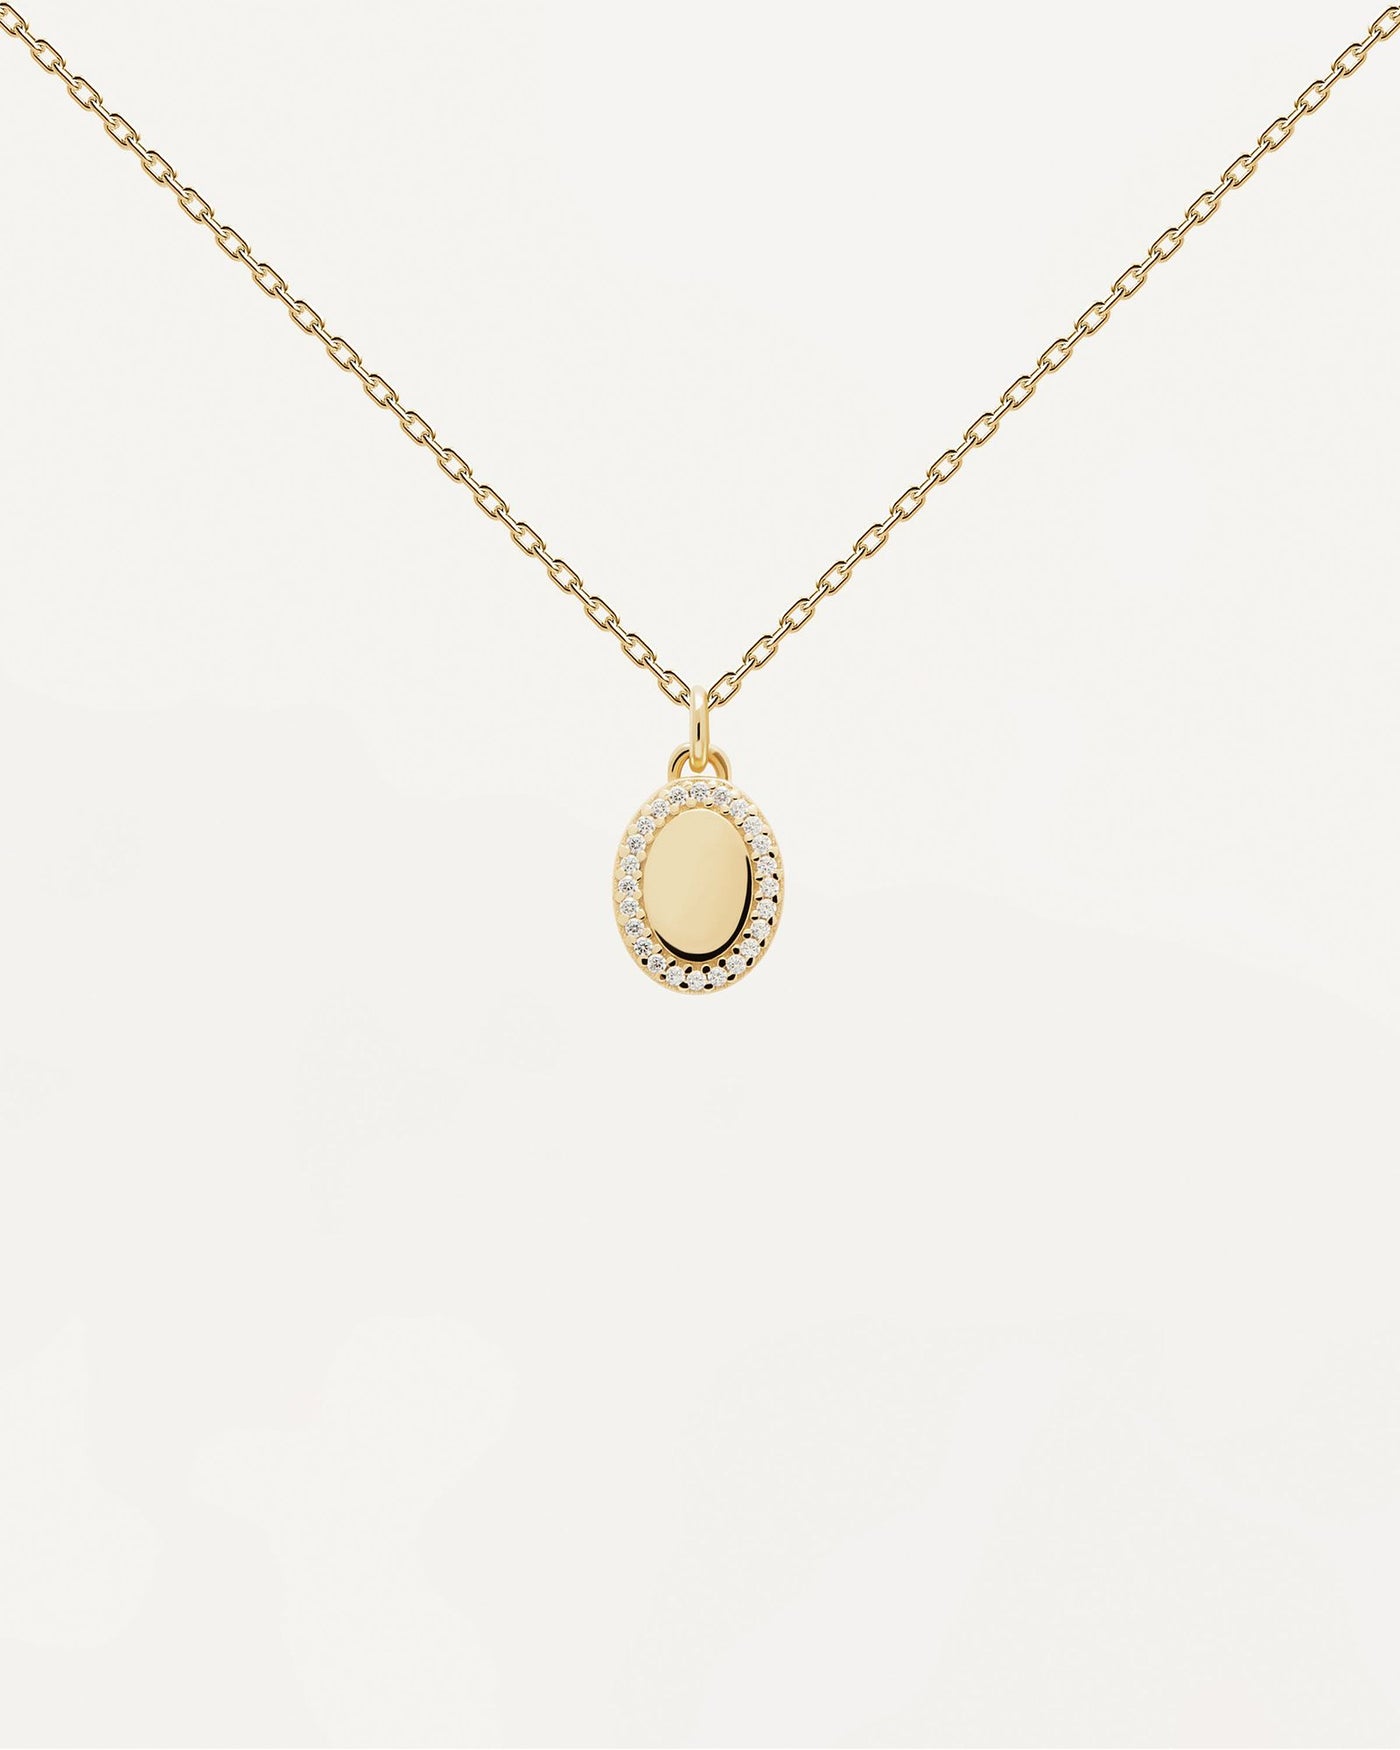 2024 Selection | Mademoiselle Necklace. Gold-plated silver necklace with pendant circled by white zirconia to personalize. Get the latest arrival from PDPAOLA. Place your order safely and get this Best Seller. Free Shipping.